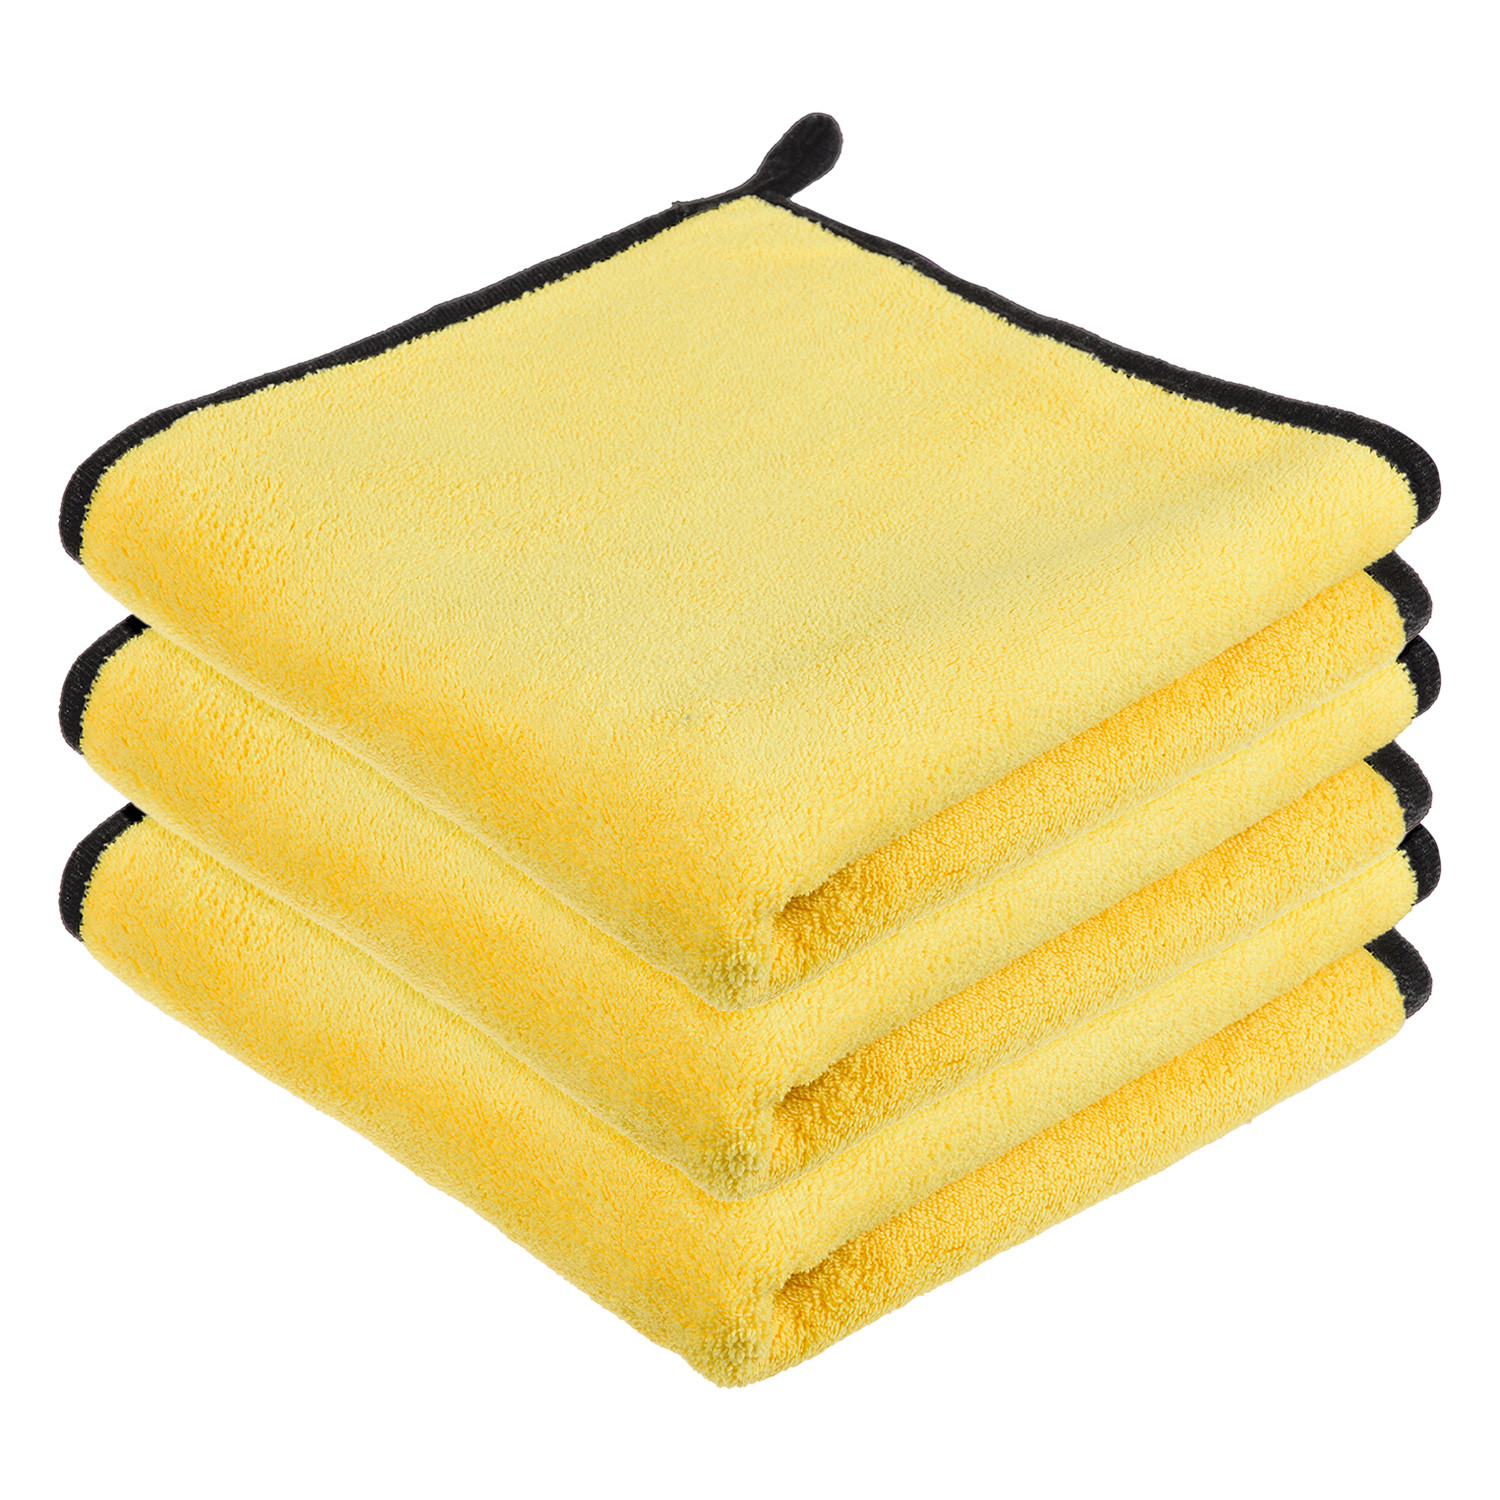 Kuber Industries Cleaning Towel|Microfiber Reusable Cloths|Highly Absorbent Washable Towel for Kitchen With Hanging Loop|Car|Window|40x40 Cm|Yellow